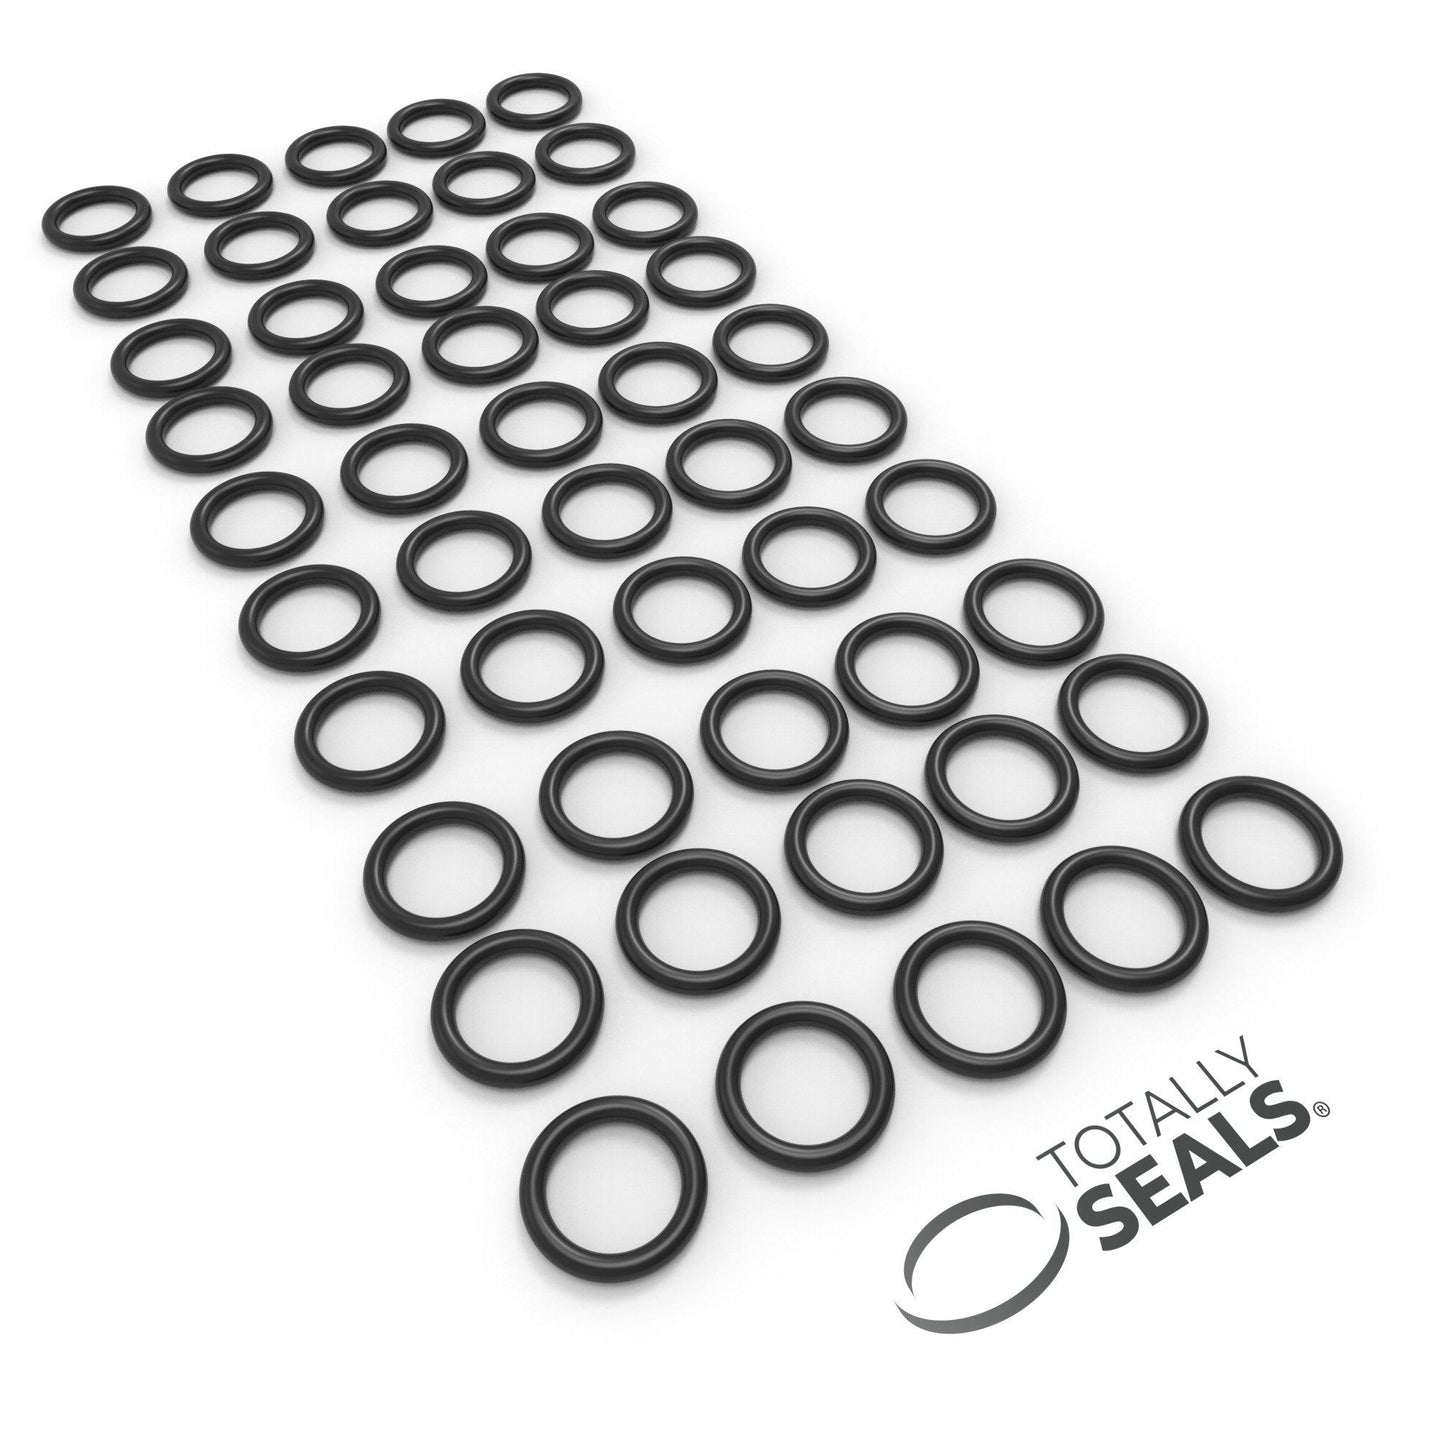 18mm x 1.5mm (21mm OD) Nitrile O-Rings - Totally Seals®